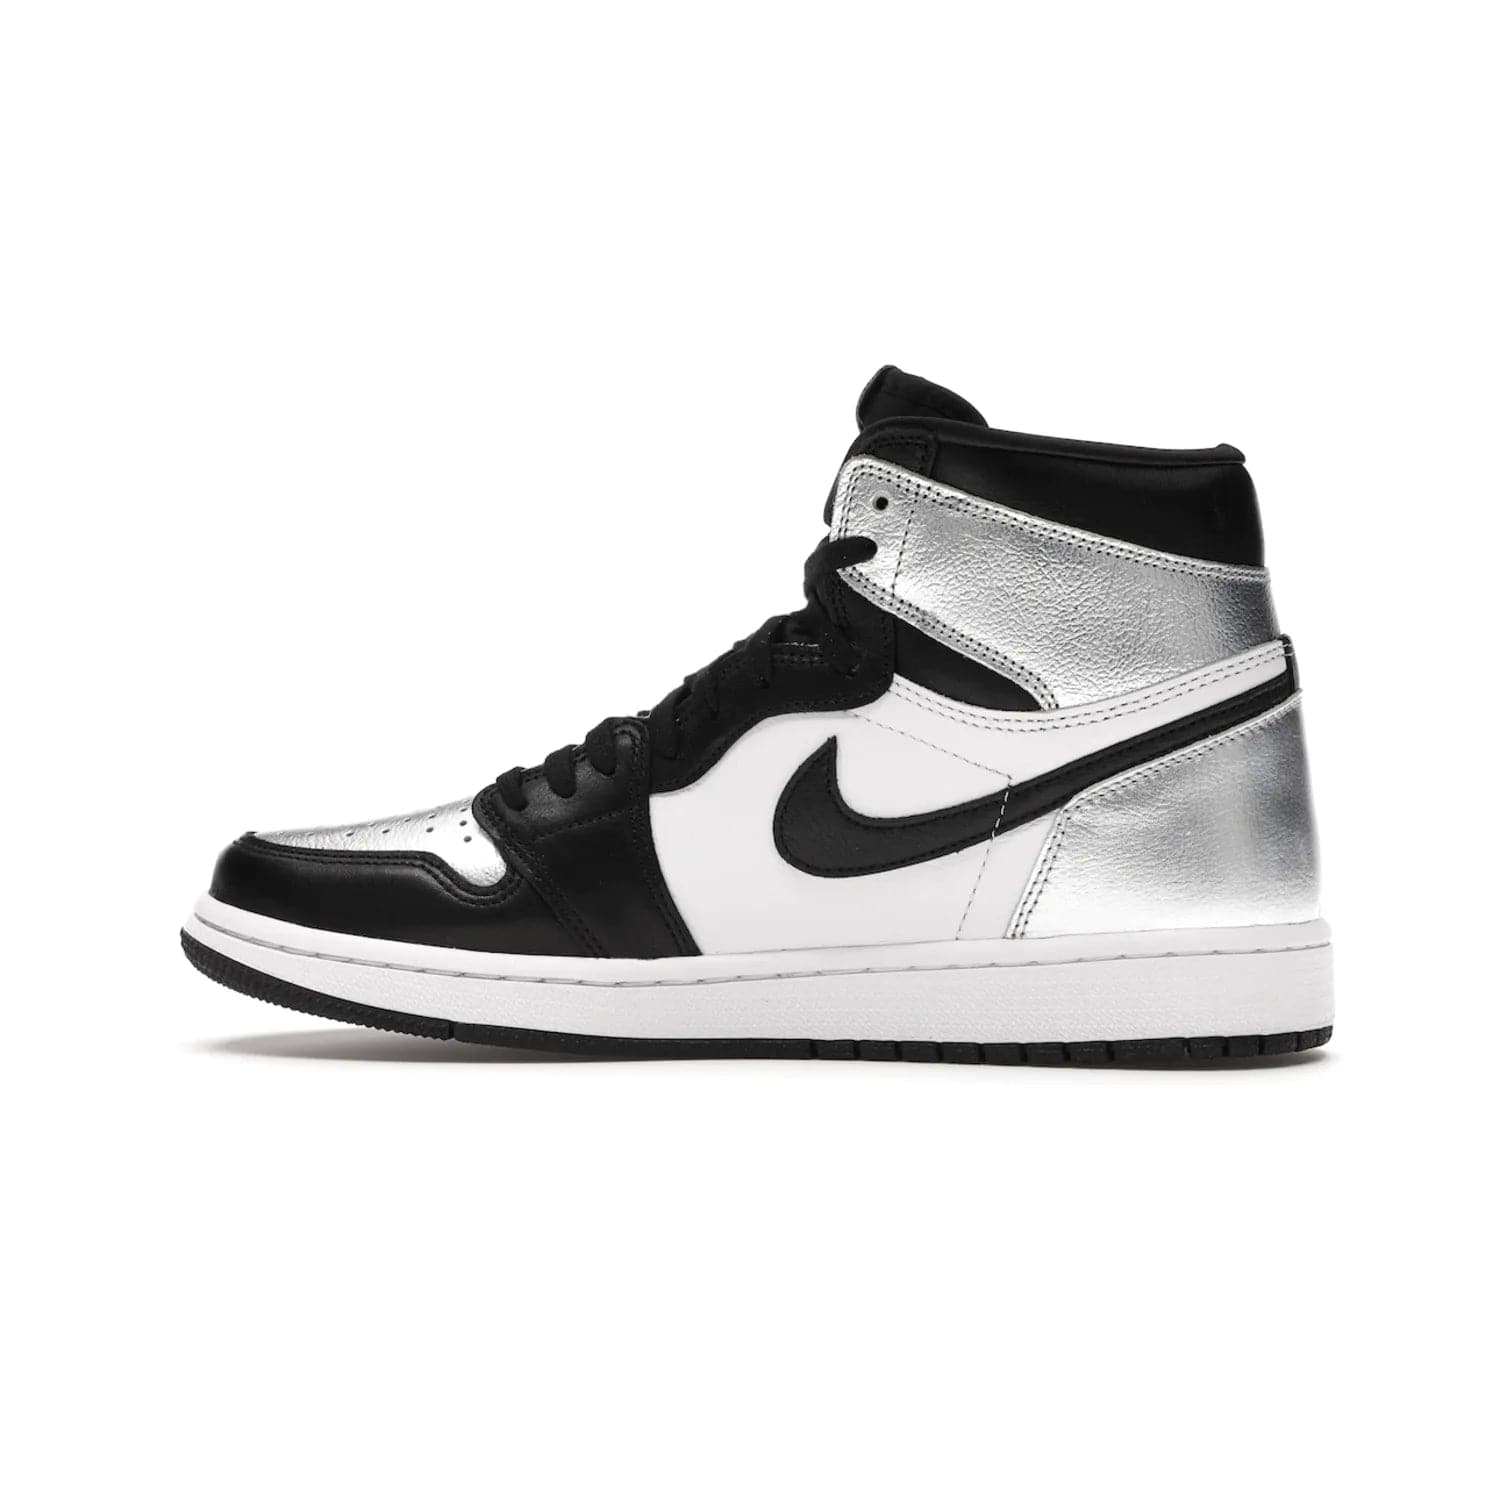 Jordan 1 Retro High Silver Toe (Women's) - Image 20 - Only at www.BallersClubKickz.com - Introducing the Jordan 1 Retro High Silver Toe (Women's): an updated spin on the iconic 'Black Toe' theme. Featuring white & black leather and silver patent leather construction. Nike Air branding, Air Jordan Wings logo, and white/black sole finish give a classic look. The perfect addition to an on-trend streetwear look. Available in classic black & white, this Jordan 1 is an instant classic. Released in February 20